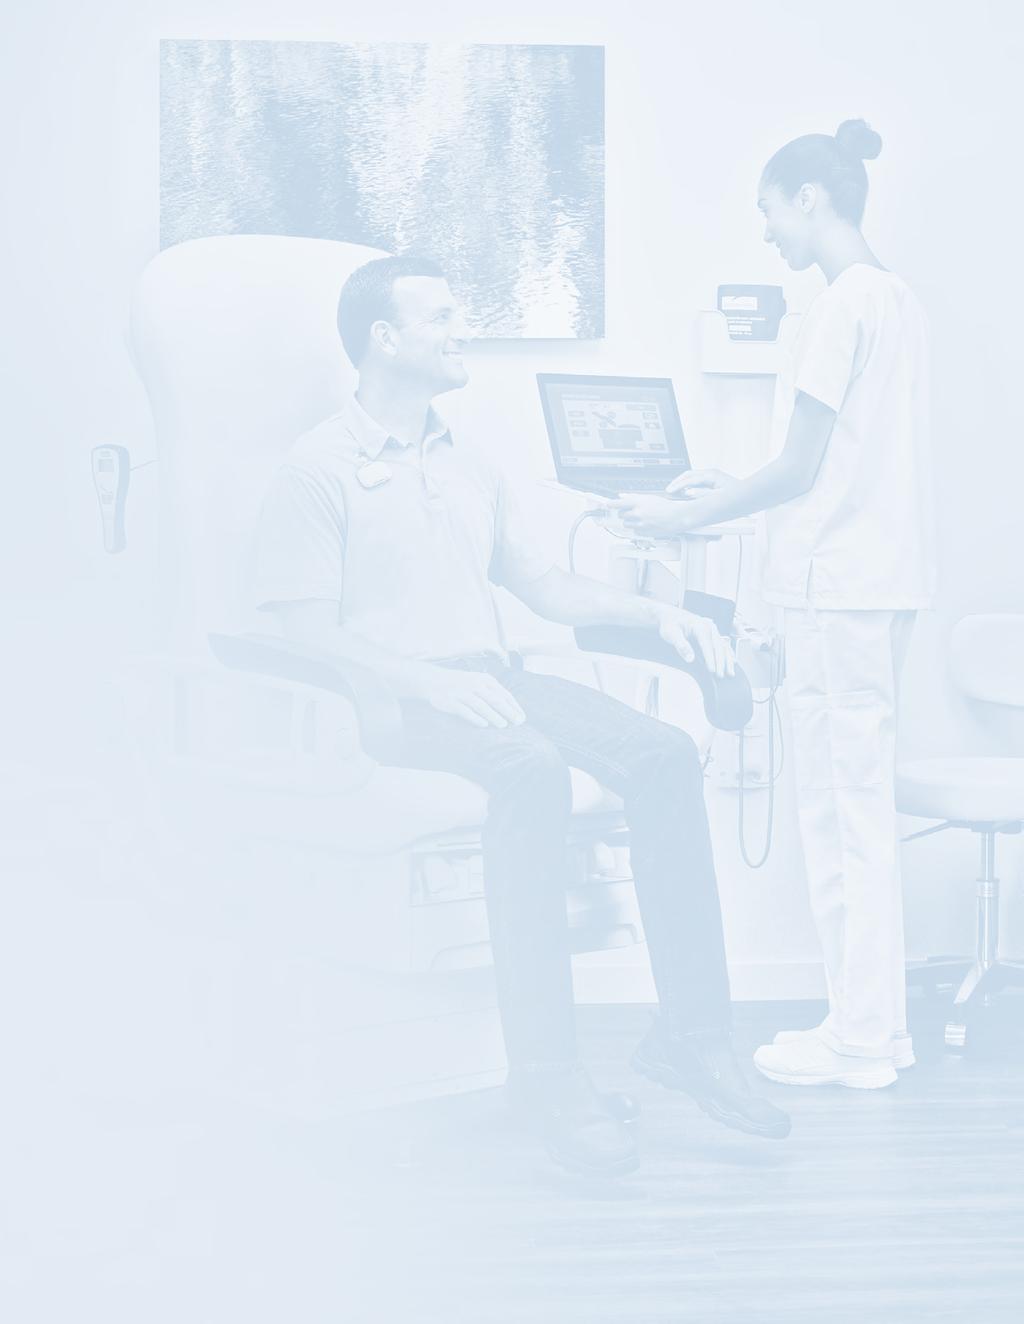 Introduction This is Part Two of Midmark s Point of Care Ecosystem Series that examines how new technologies are creating a fully connected point of care ecosystem in outpatient facilities.